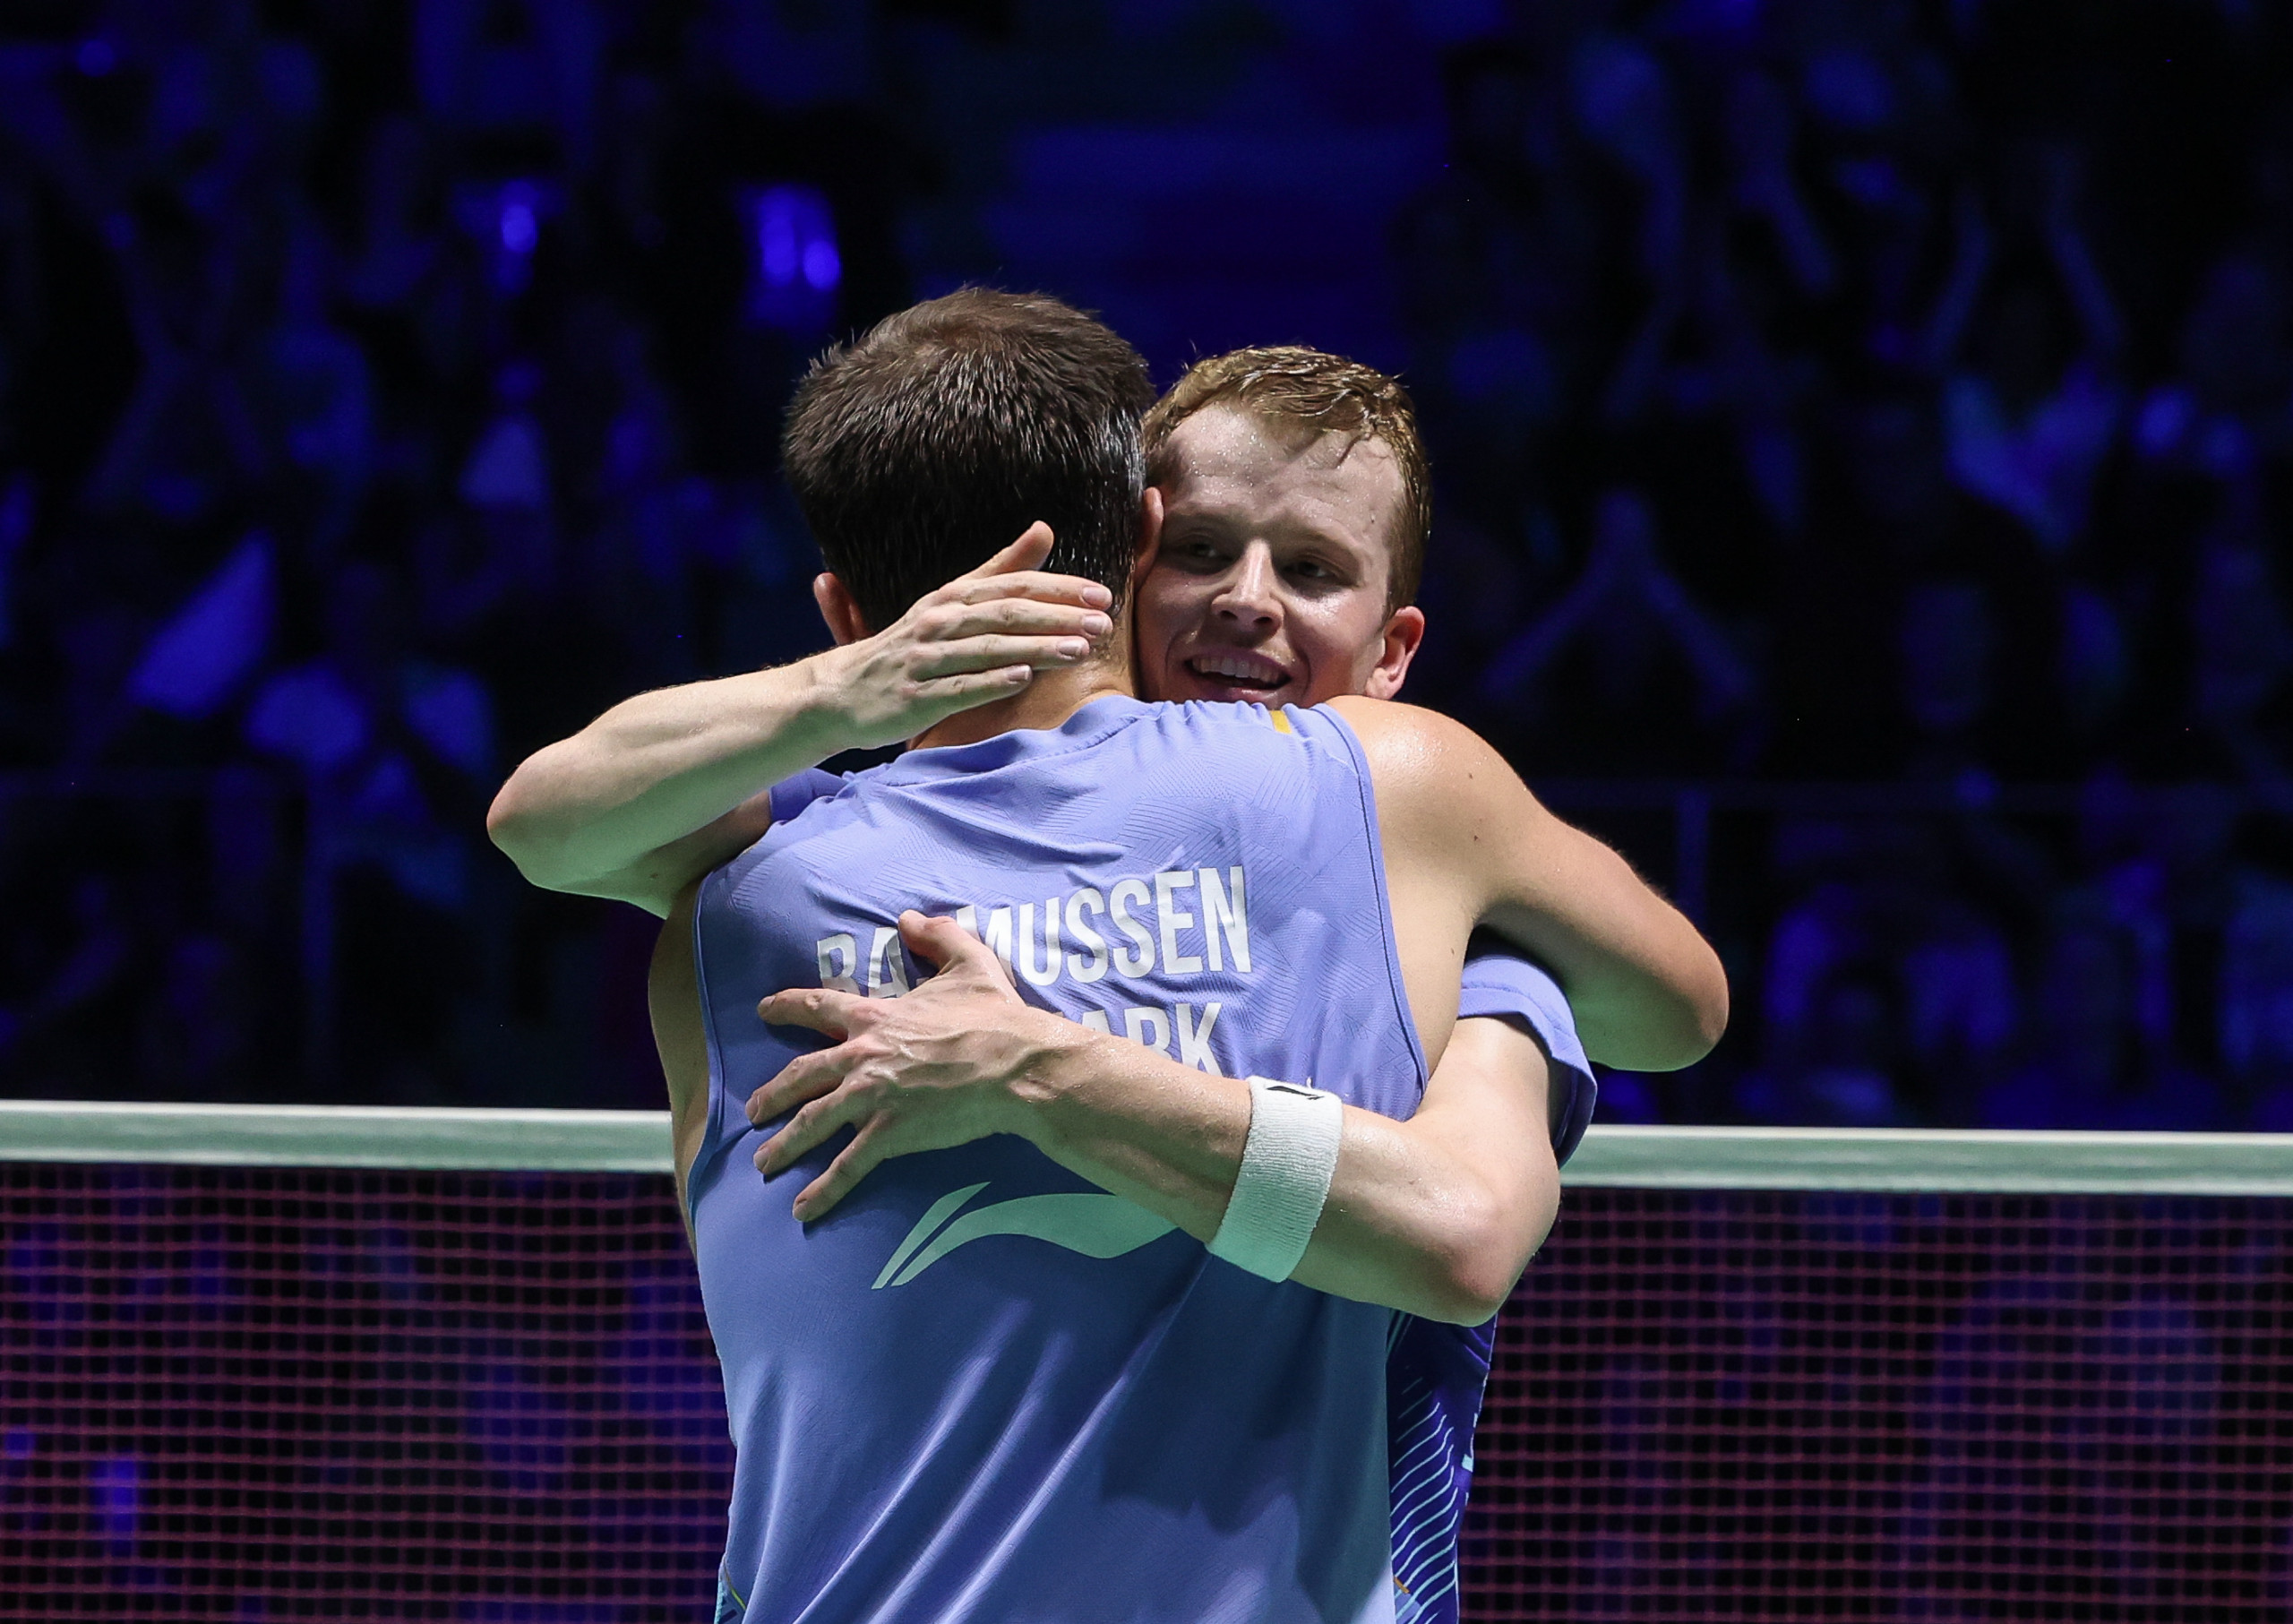 Danes Triumph Over Chinese Rivals in BWF World Tour Semifinals